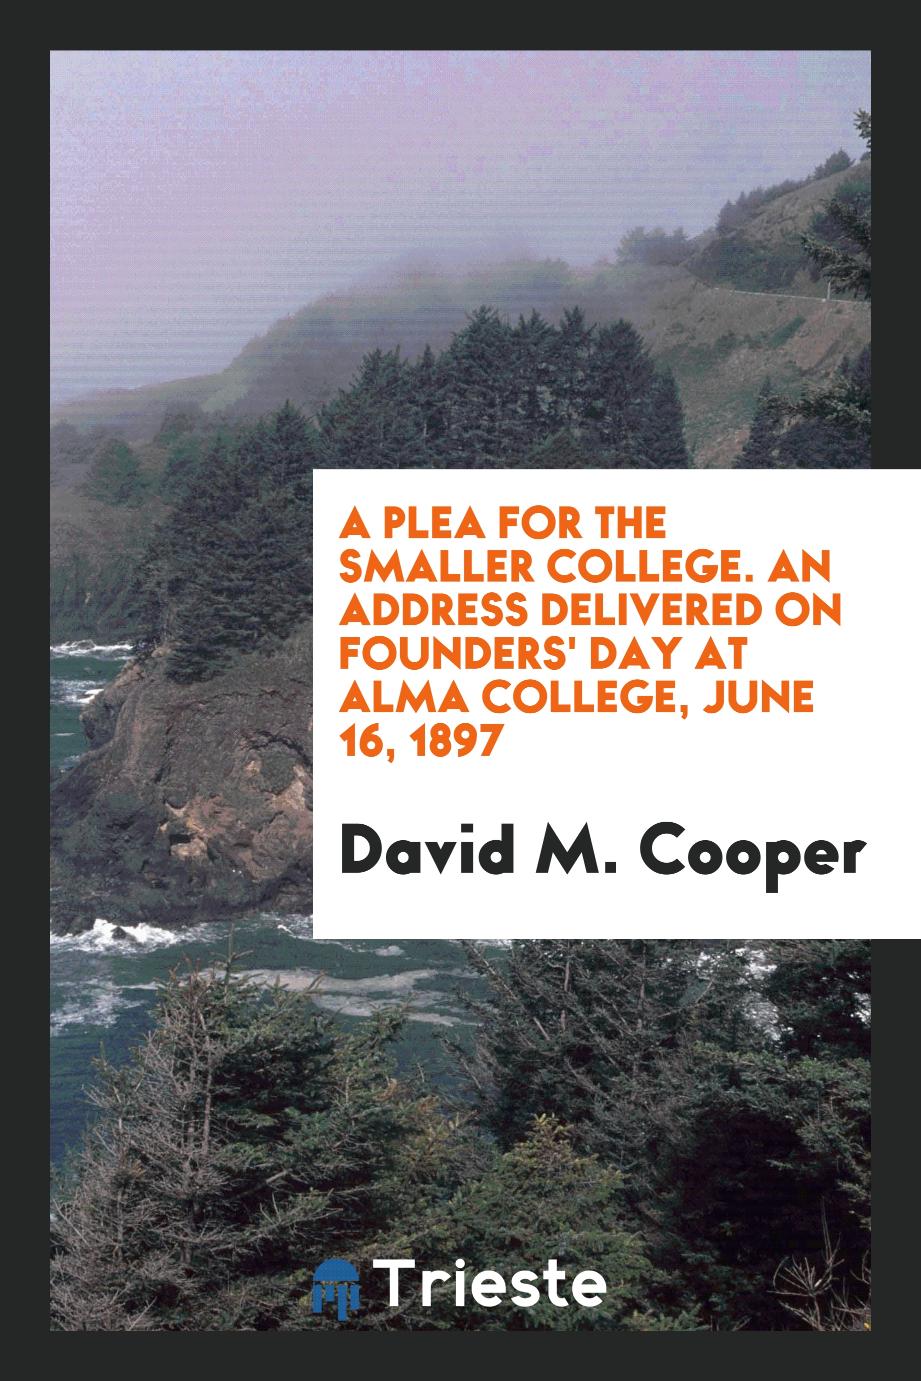 David M. Cooper - A plea for the smaller college. An address delivered on Founders' day at Alma college, June 16, 1897